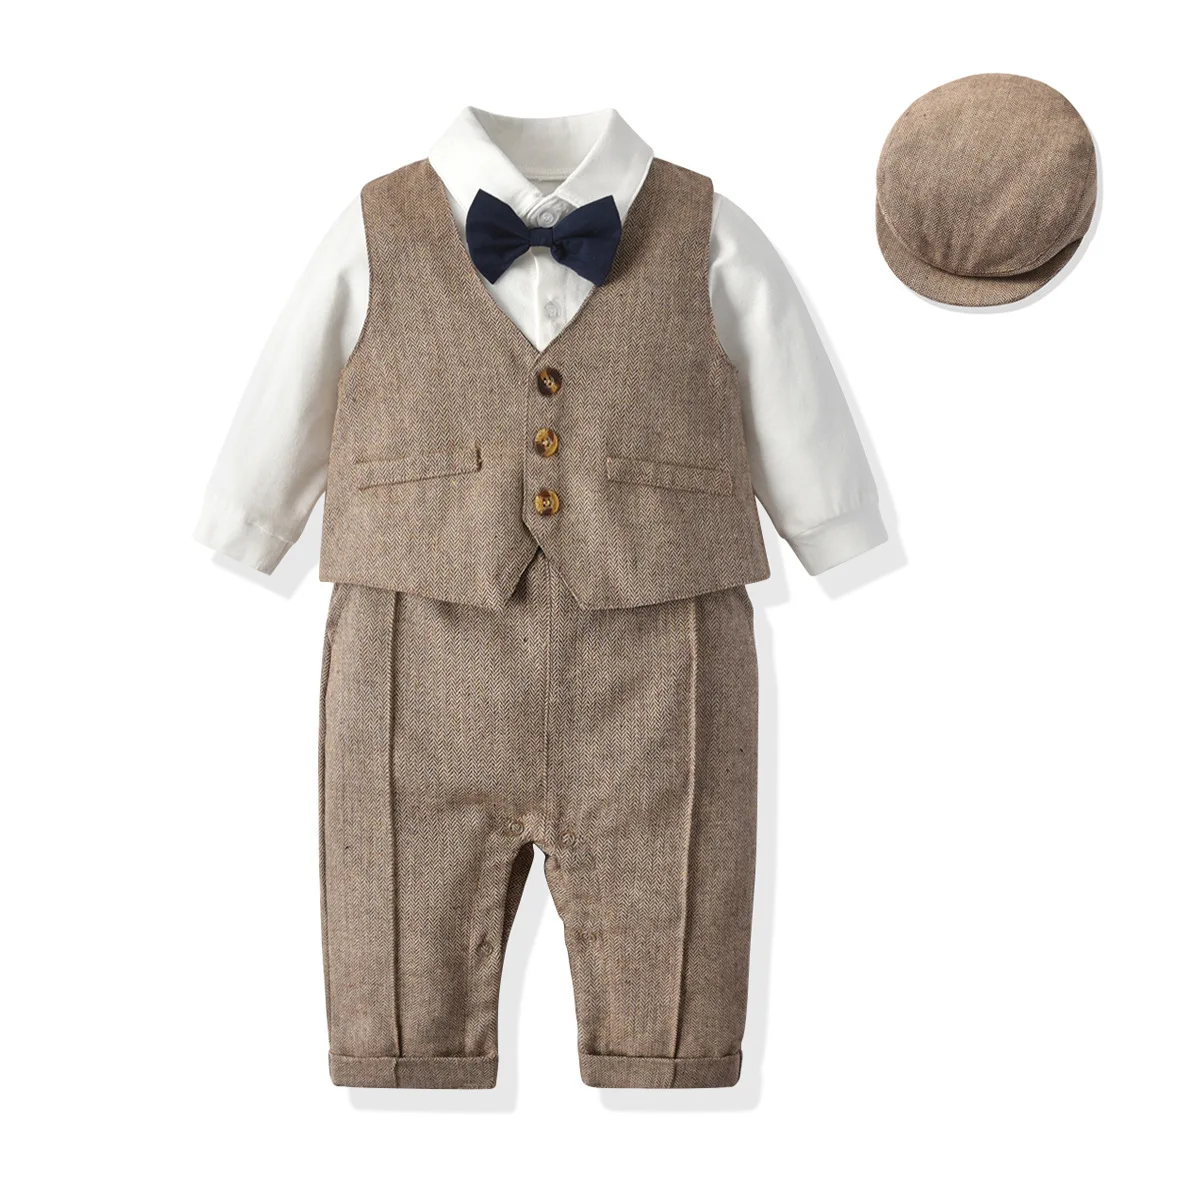 Baby Boys Gentleman Outfits Suits Clothing Spring and Autumn Children One-Piece Rompers Jacket Hat Suit Baby Boy Clothes